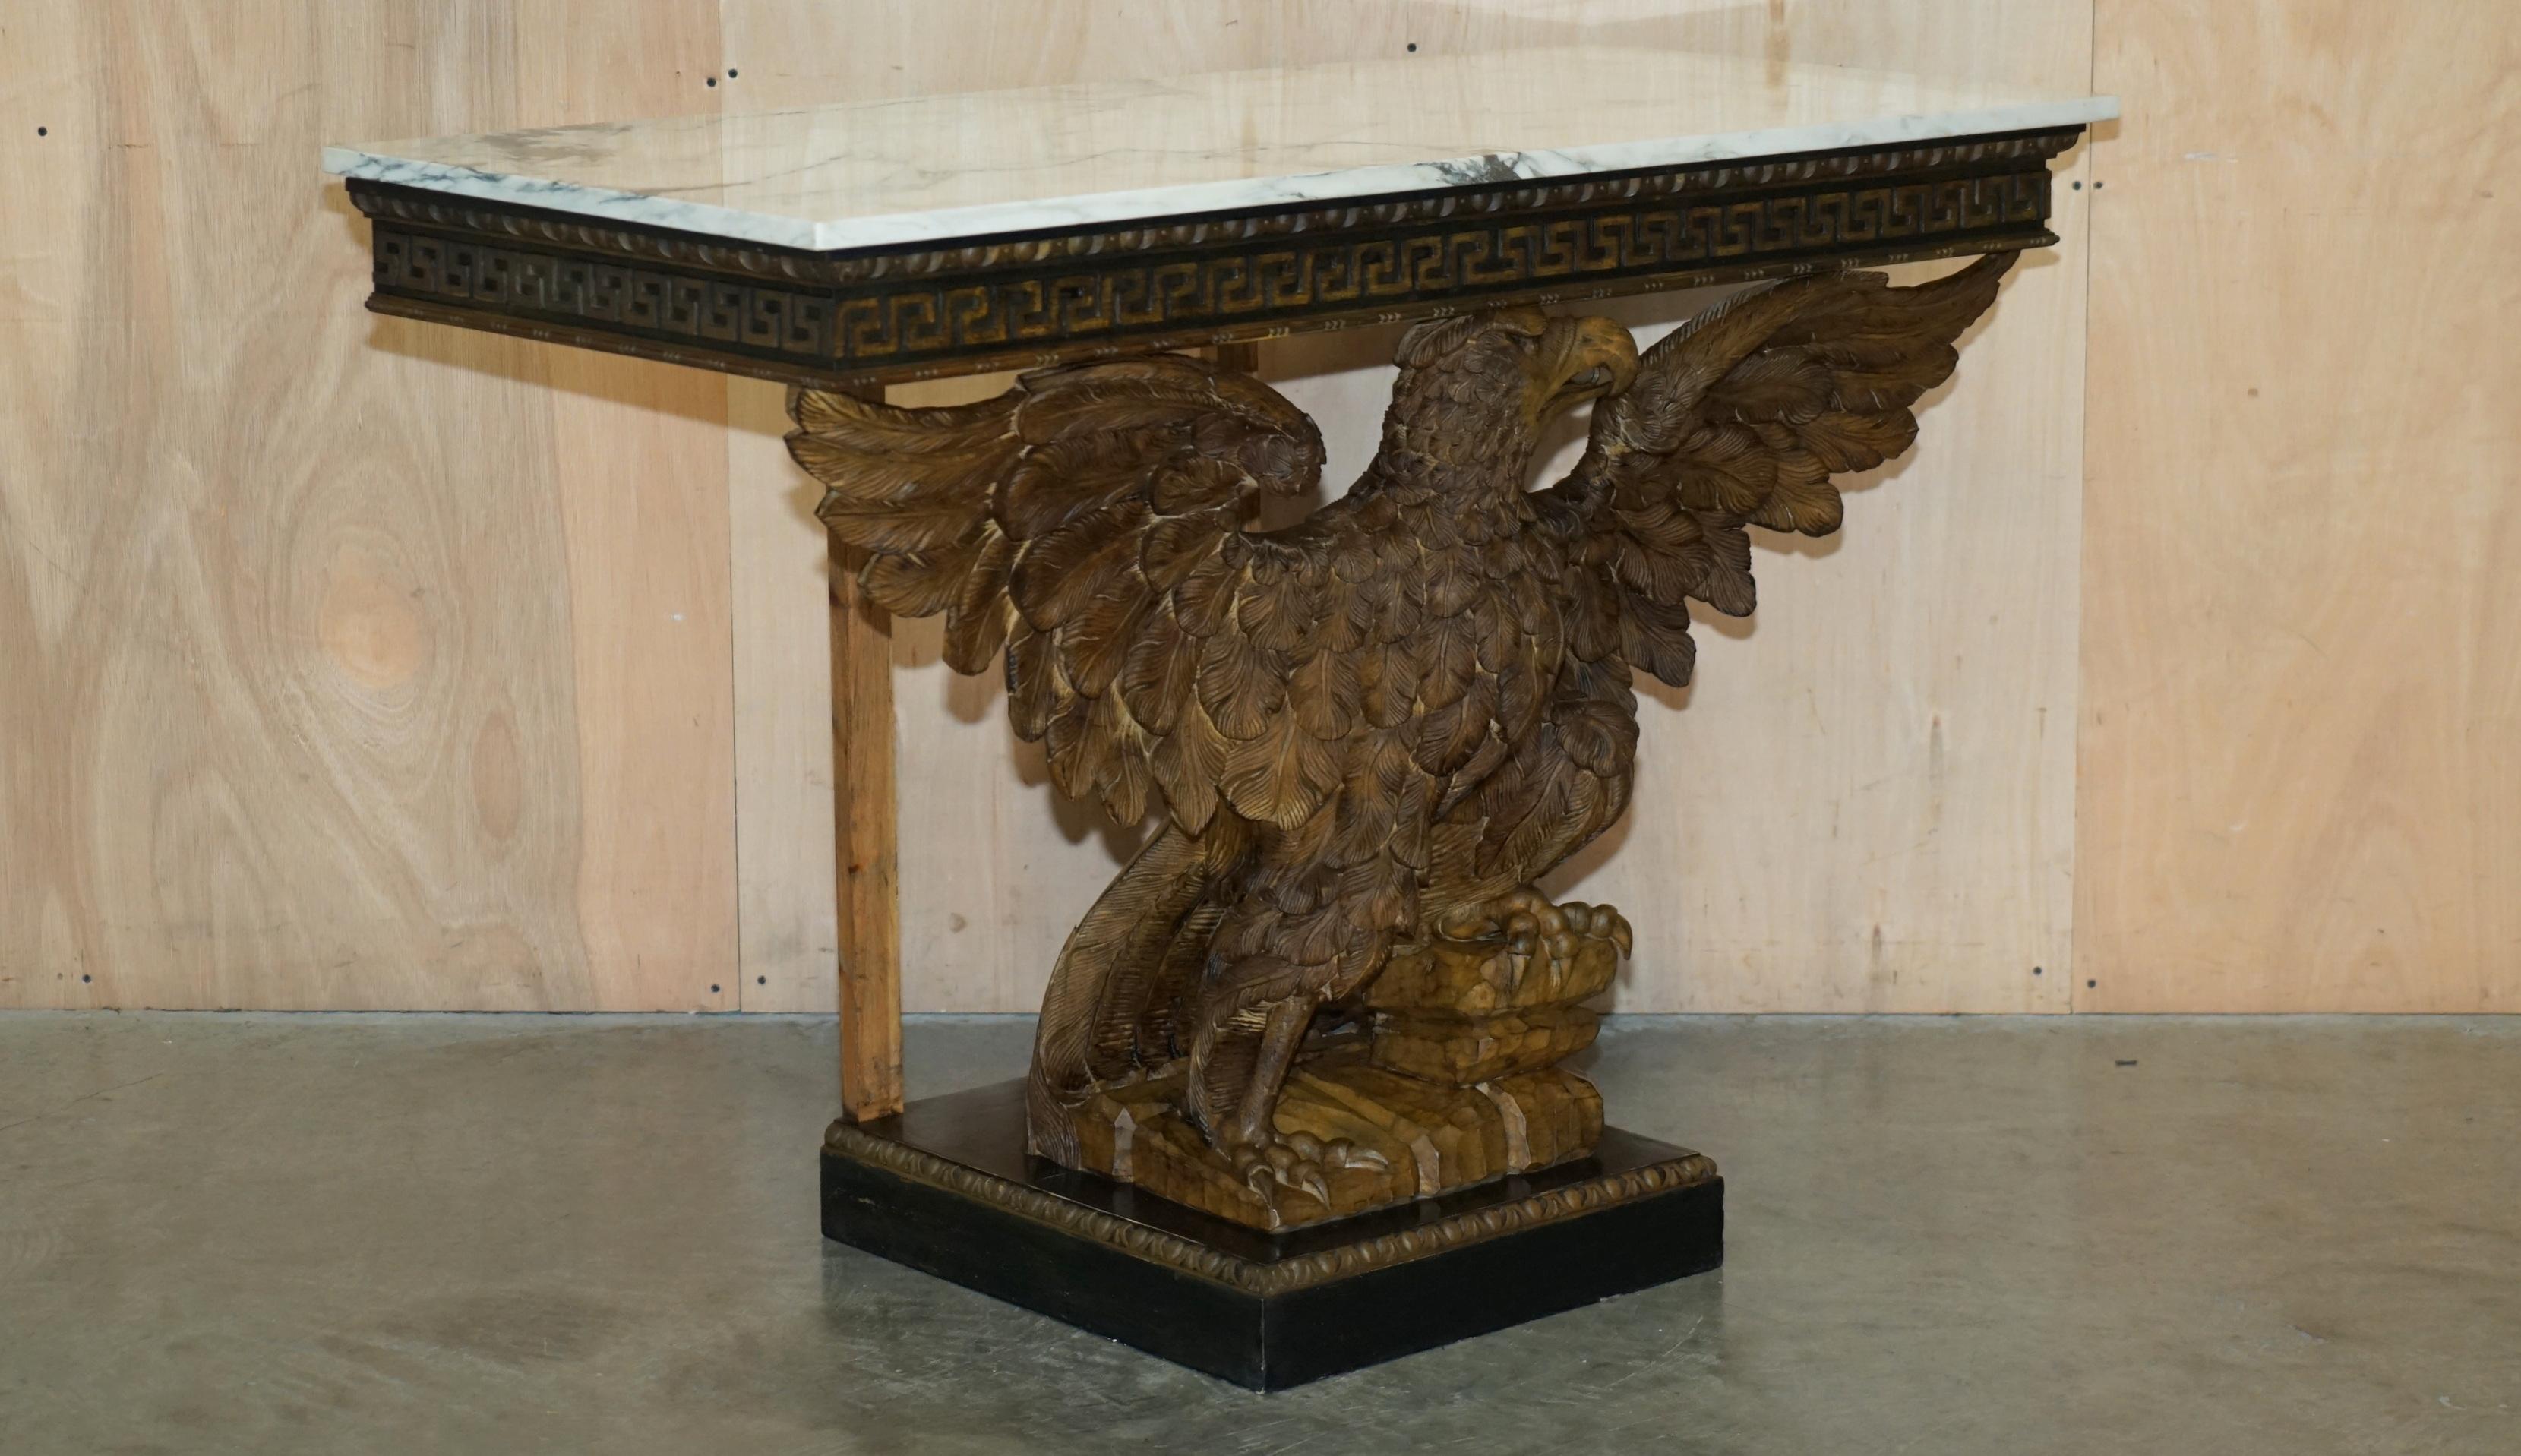 Royal House Antiques

Royal House Antiques is delighted to offer for sale this exceptionally rare, antique circa 1860, hand carved English Oak Eagle console table with fine Italian Carrara Marble top 

Please note the delivery fee listed is just a